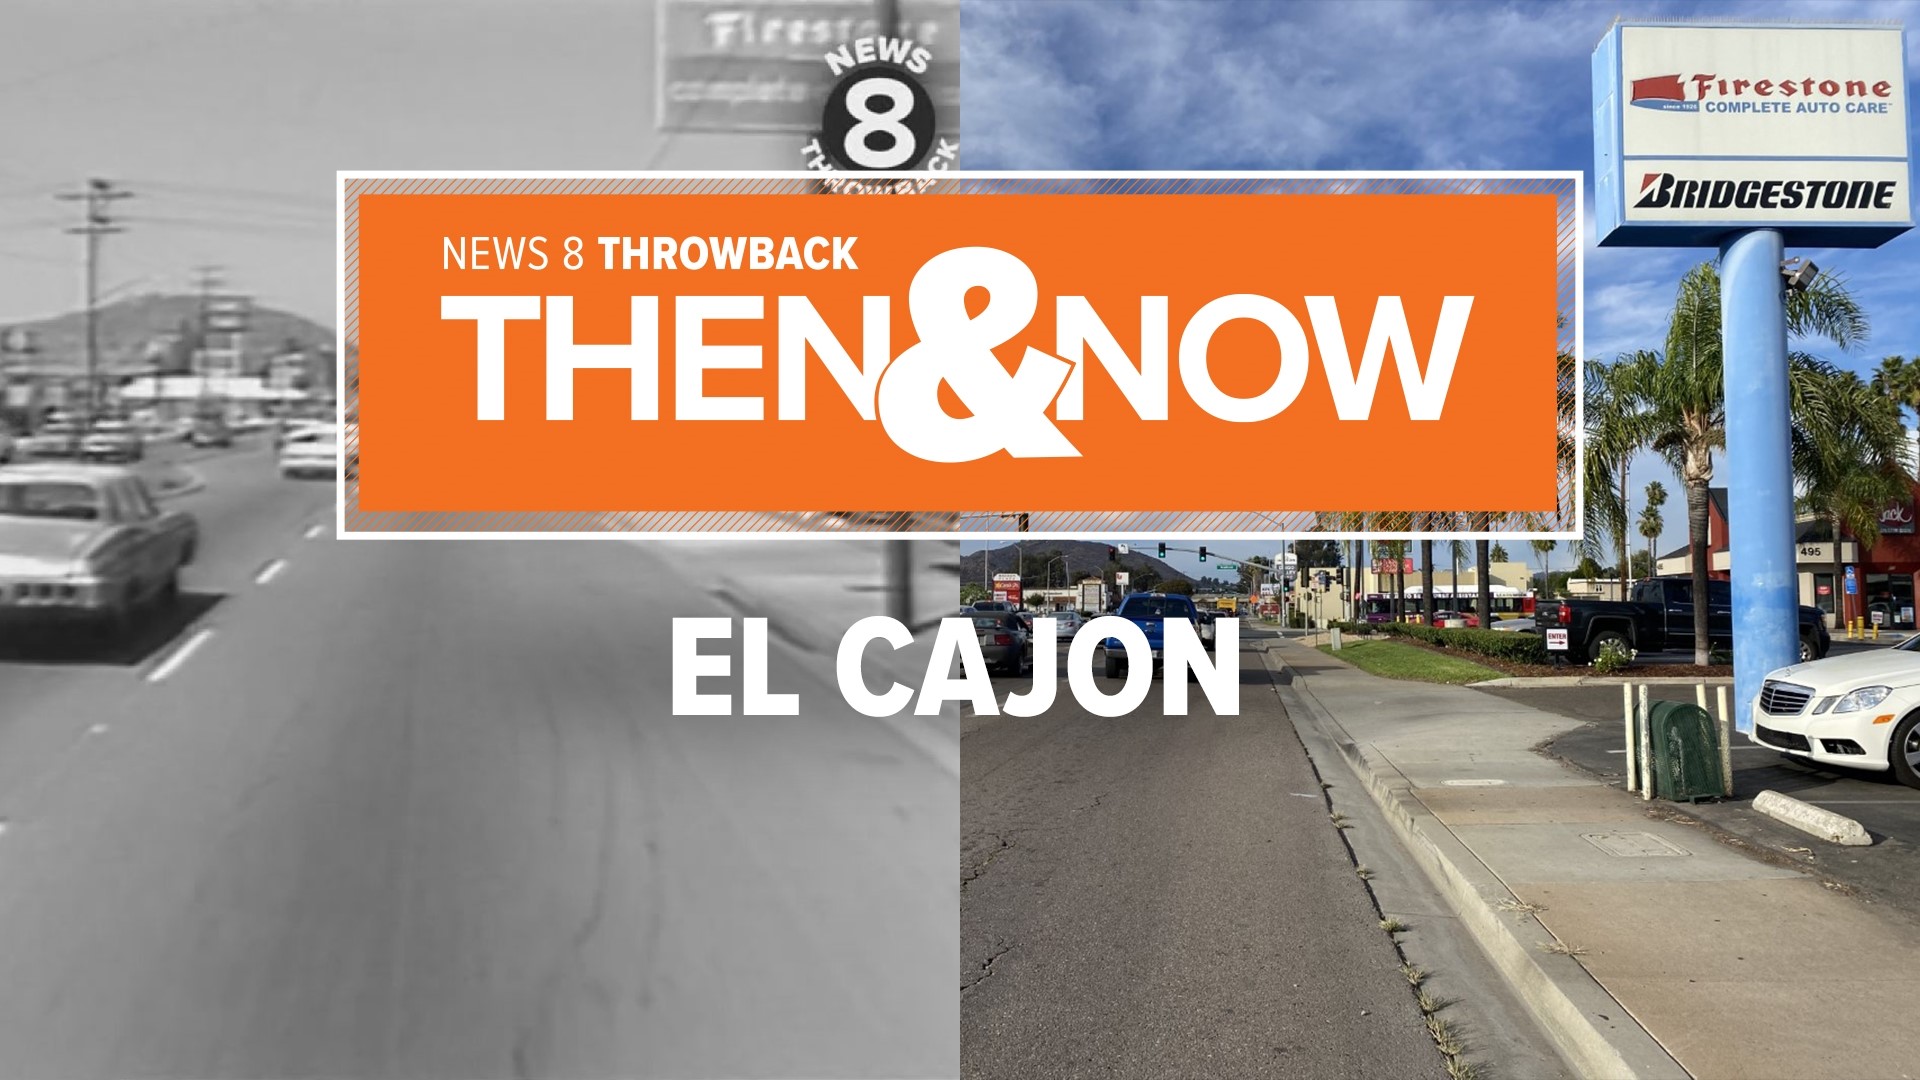 News 8 looks into the history of El Cajon, and what it's like today. We revisit the featured locations from 1987.